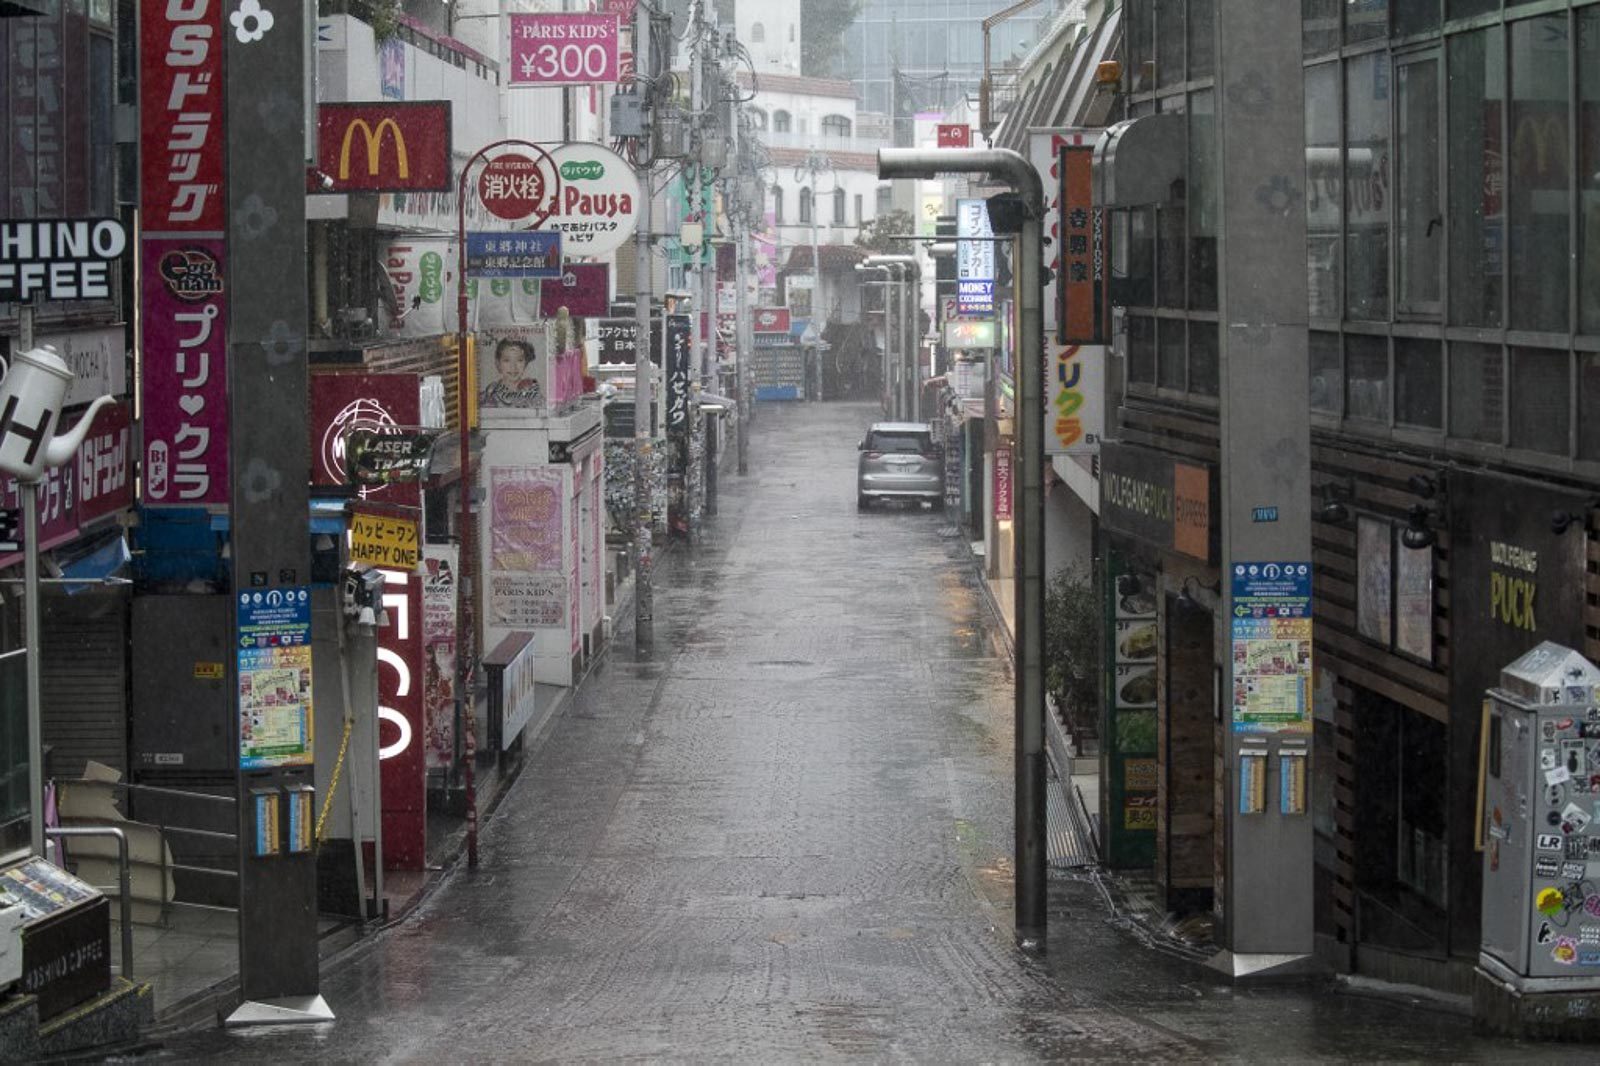 EVACUATE. Takeshita street, one of the most crowded and well-known shopping areas in the city, is pictured completely deserted in the Harajuku district of Tokyo on October 12, 2019, as the effects of Typhoon Hagibis begin to be felt in Japan's capital.  Photo by Odd Andersen/AFP  